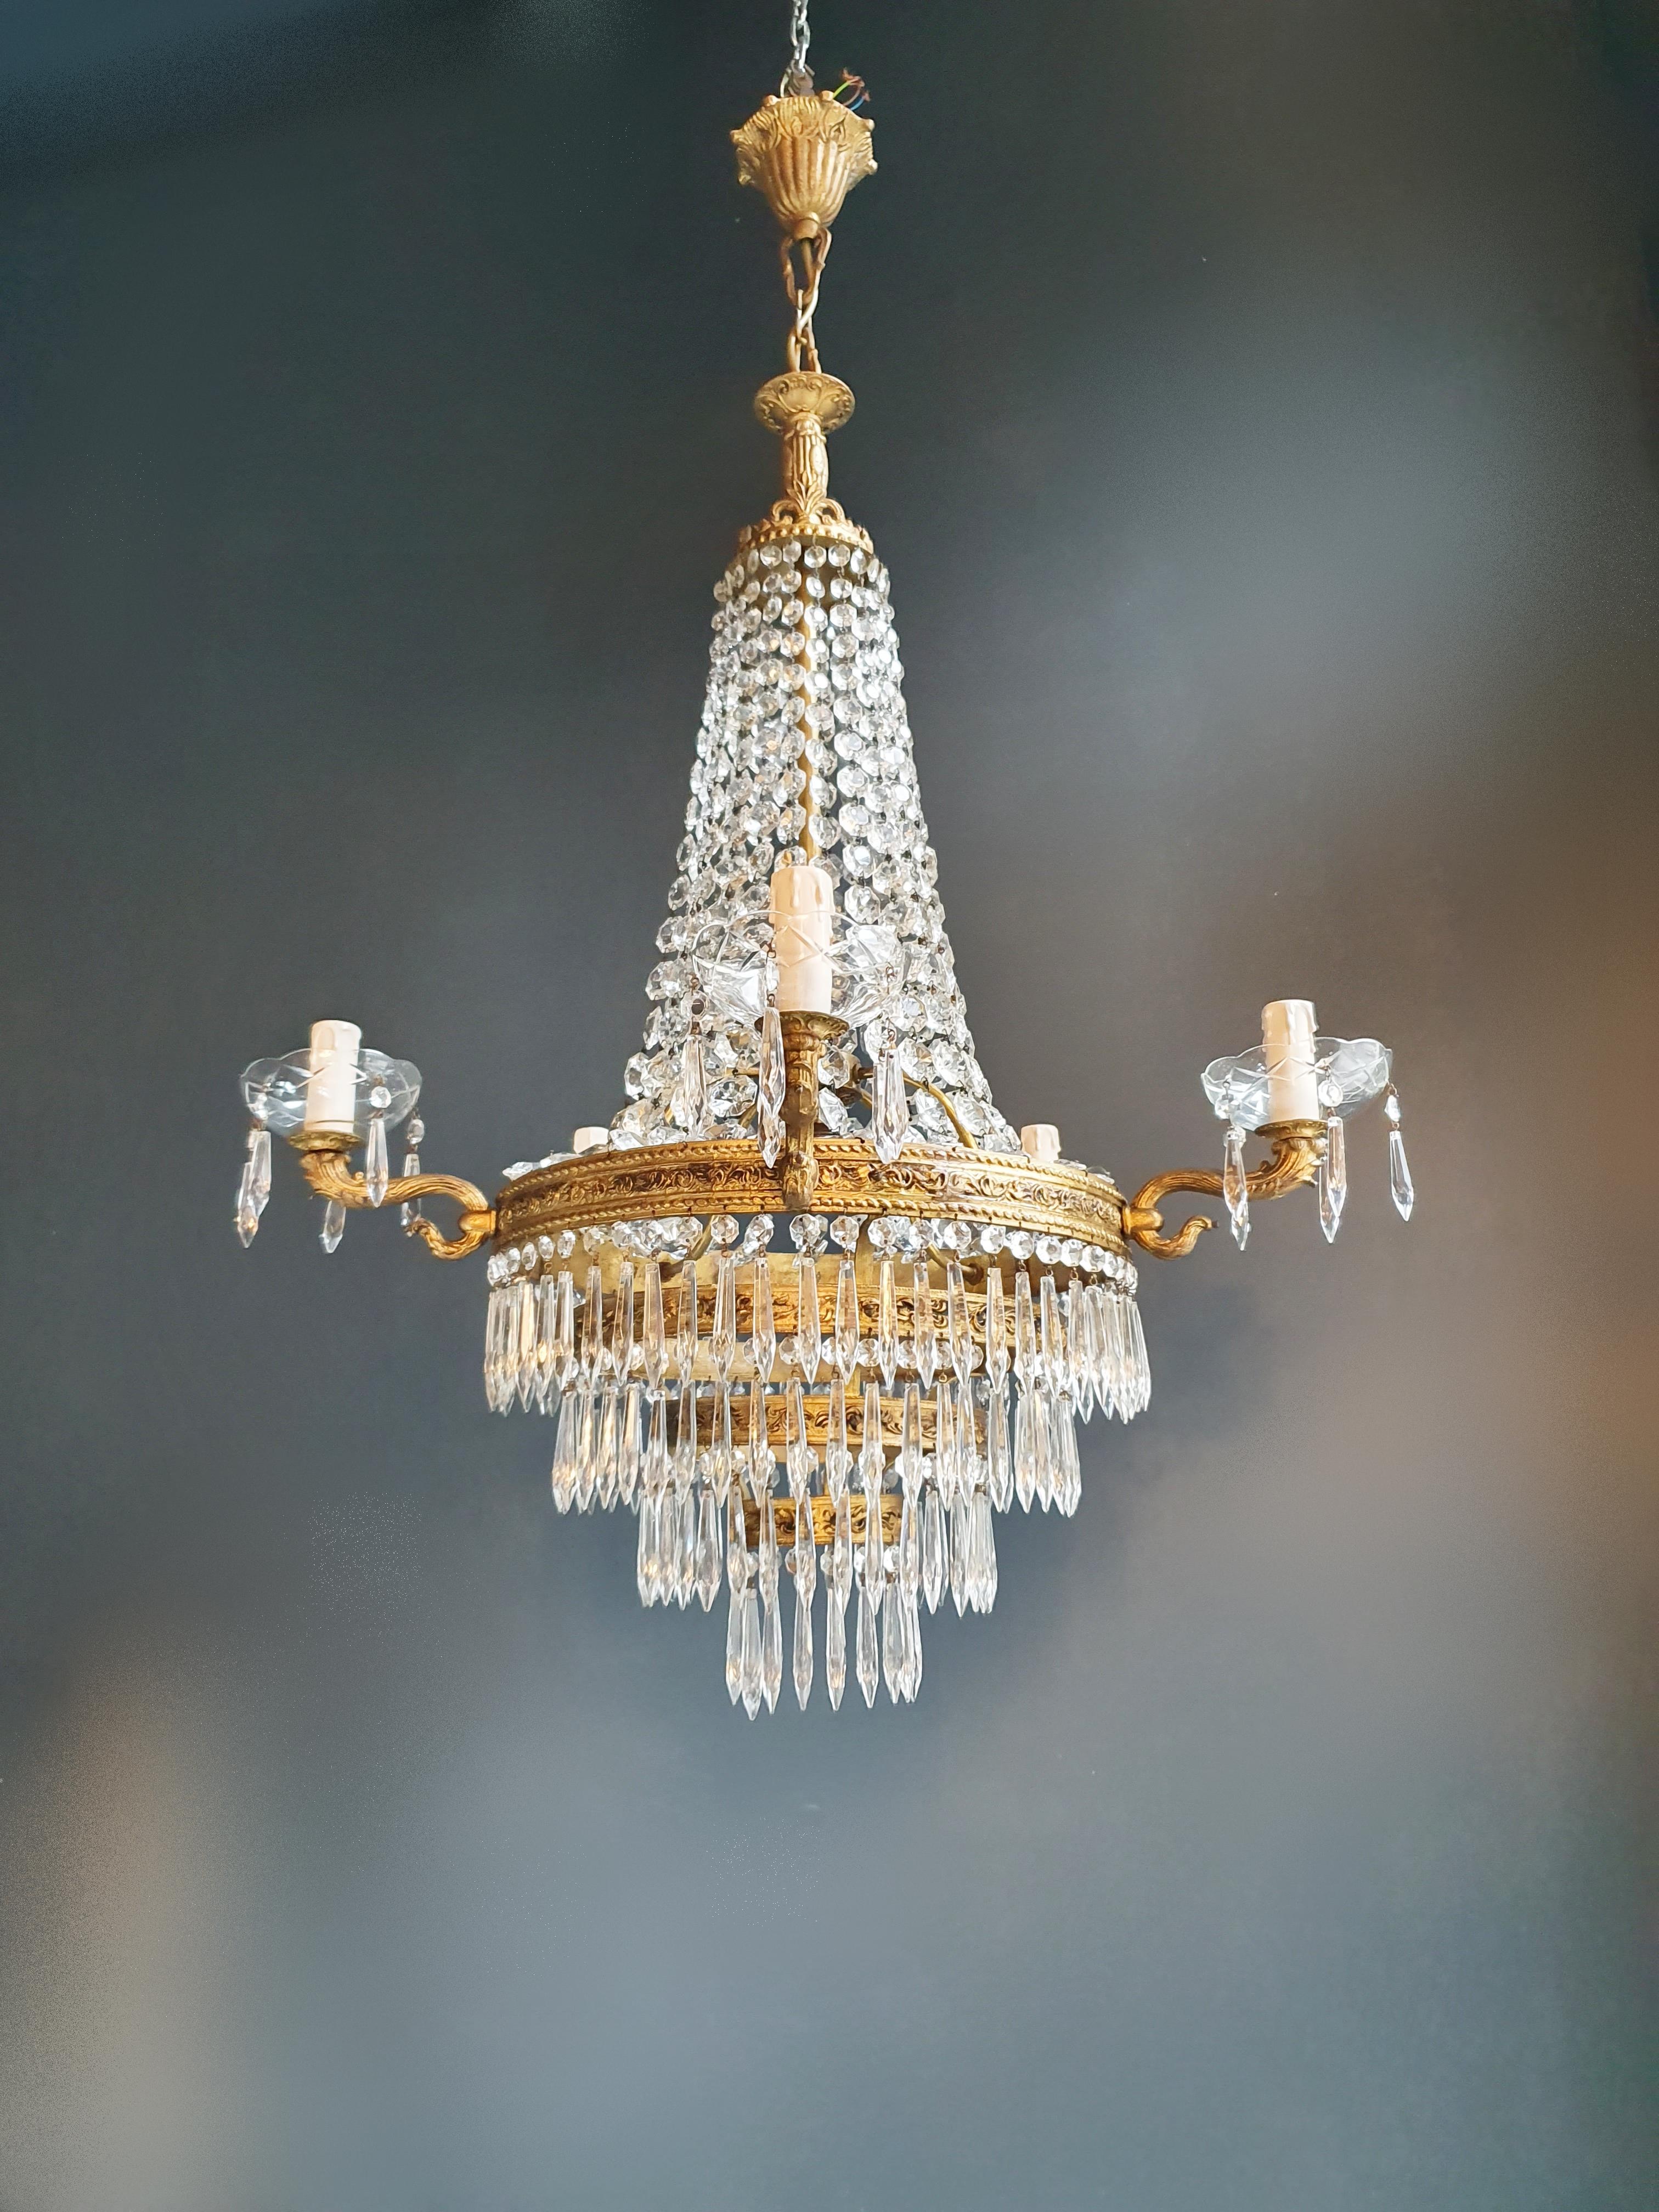 Early 20th Century Montgolfiè Empire Sac a Pearl Chandelier Crystal Lustre Ceiling Lamp Antique For Sale